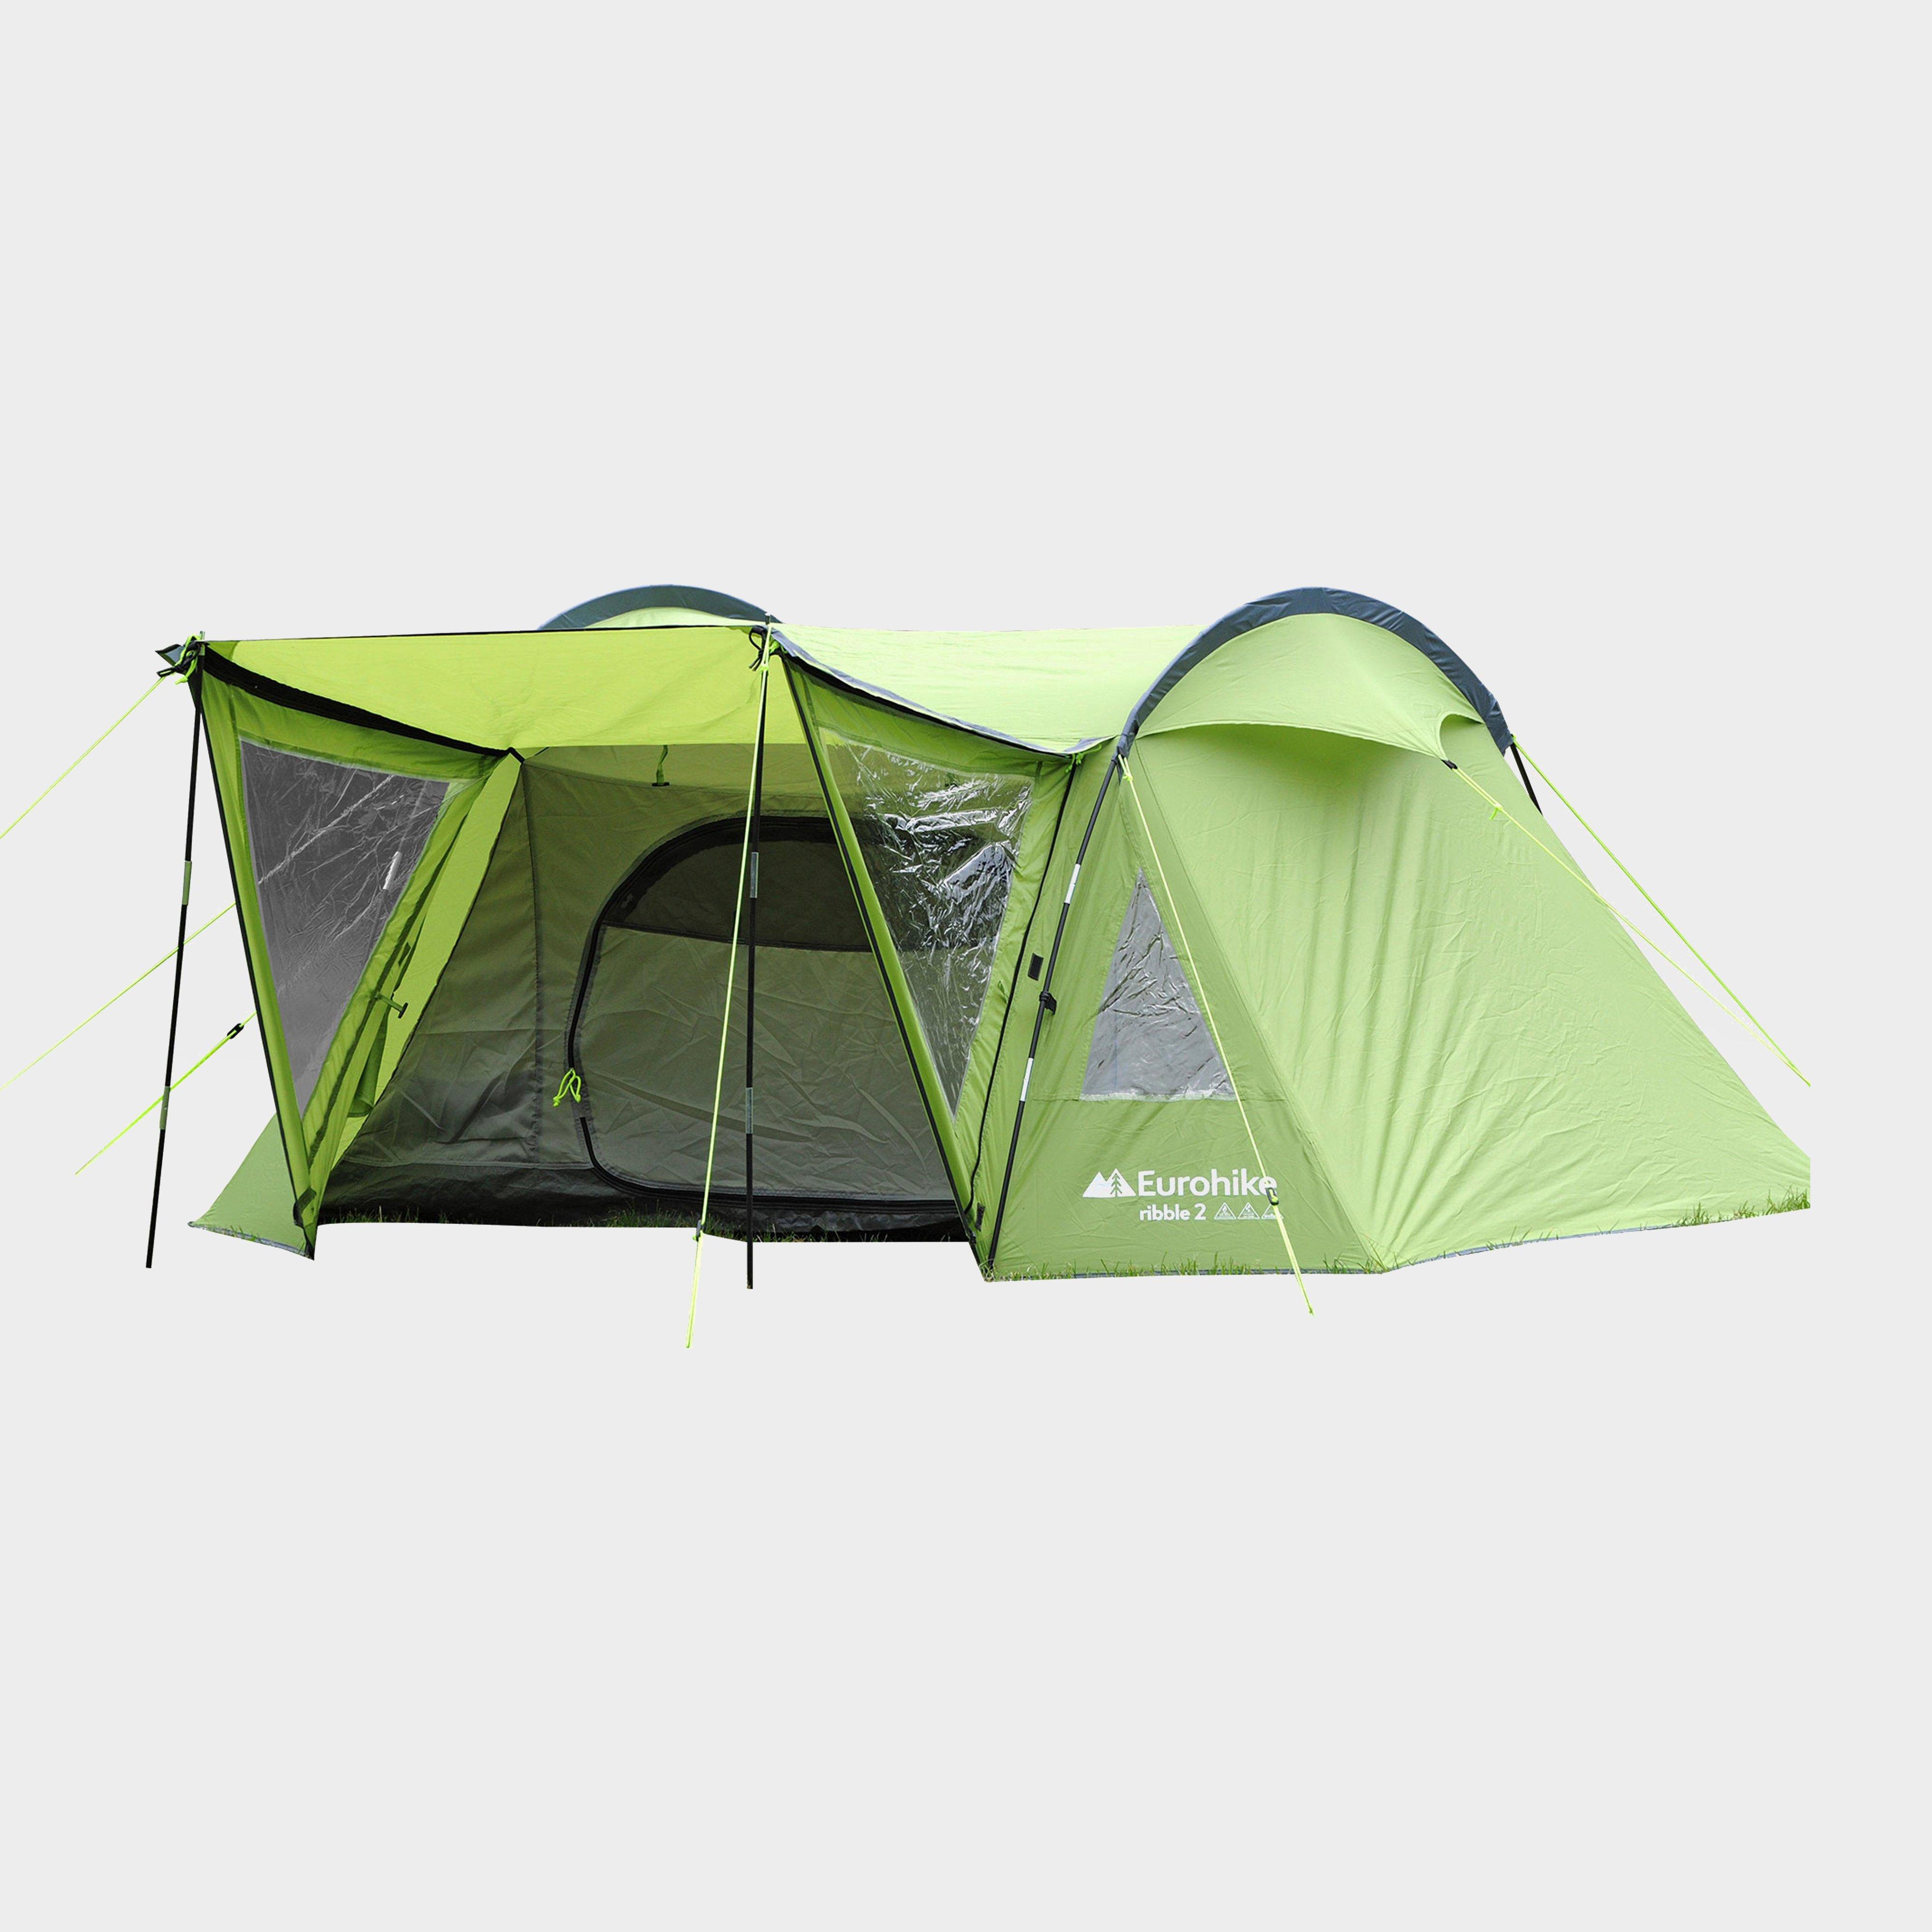 omverwerping fontein Grappig 2 Person Tents | Eurohike